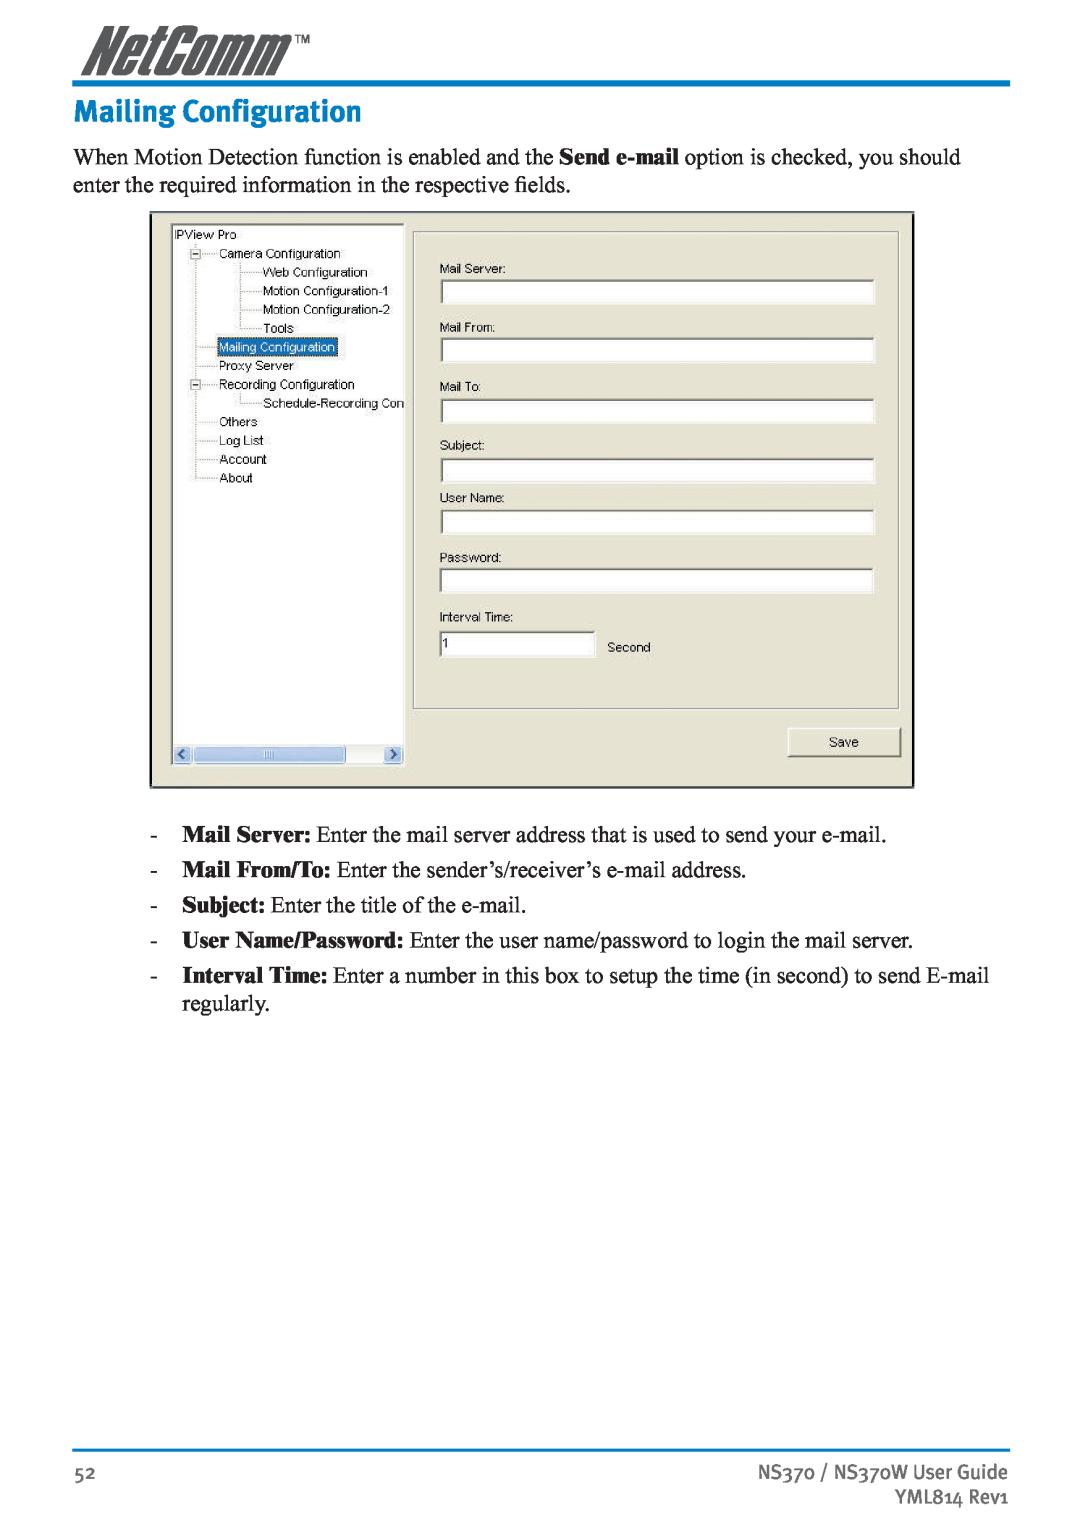 NetComm NS370W manual Mailing Configuration 